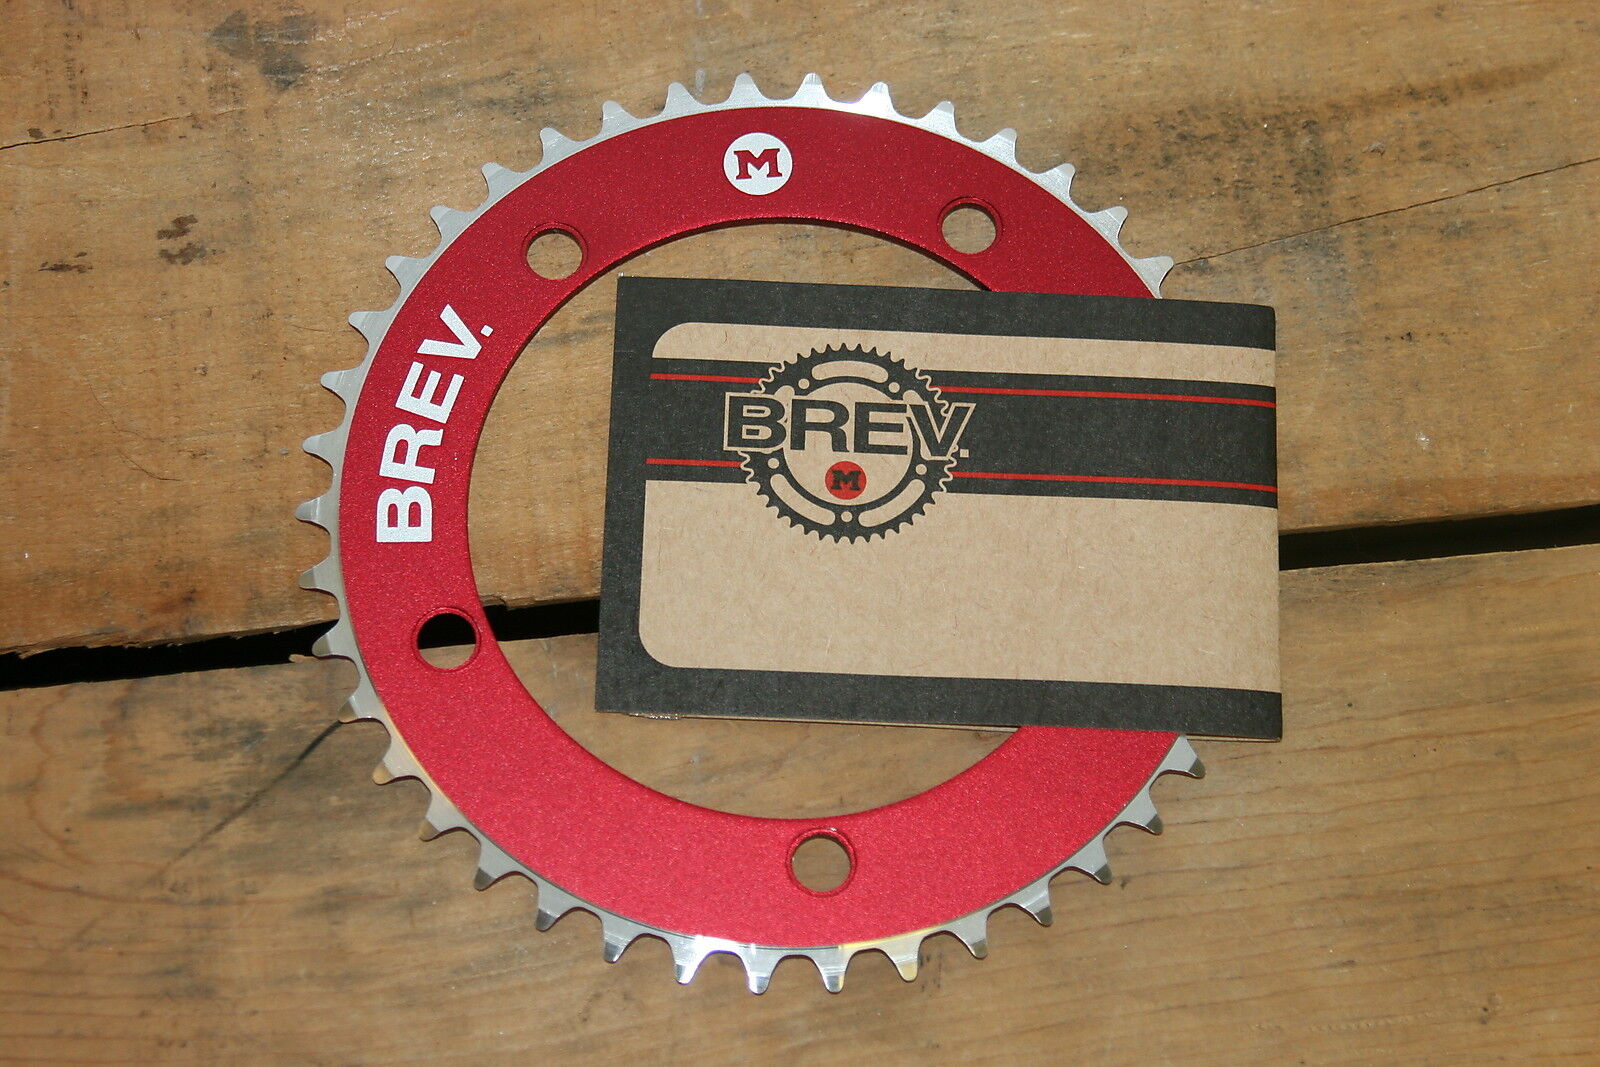 NEW Brev. M Masi Fixie Fixed Gear Chain Ring Sprocket Chainring 44t Red 130 BCD